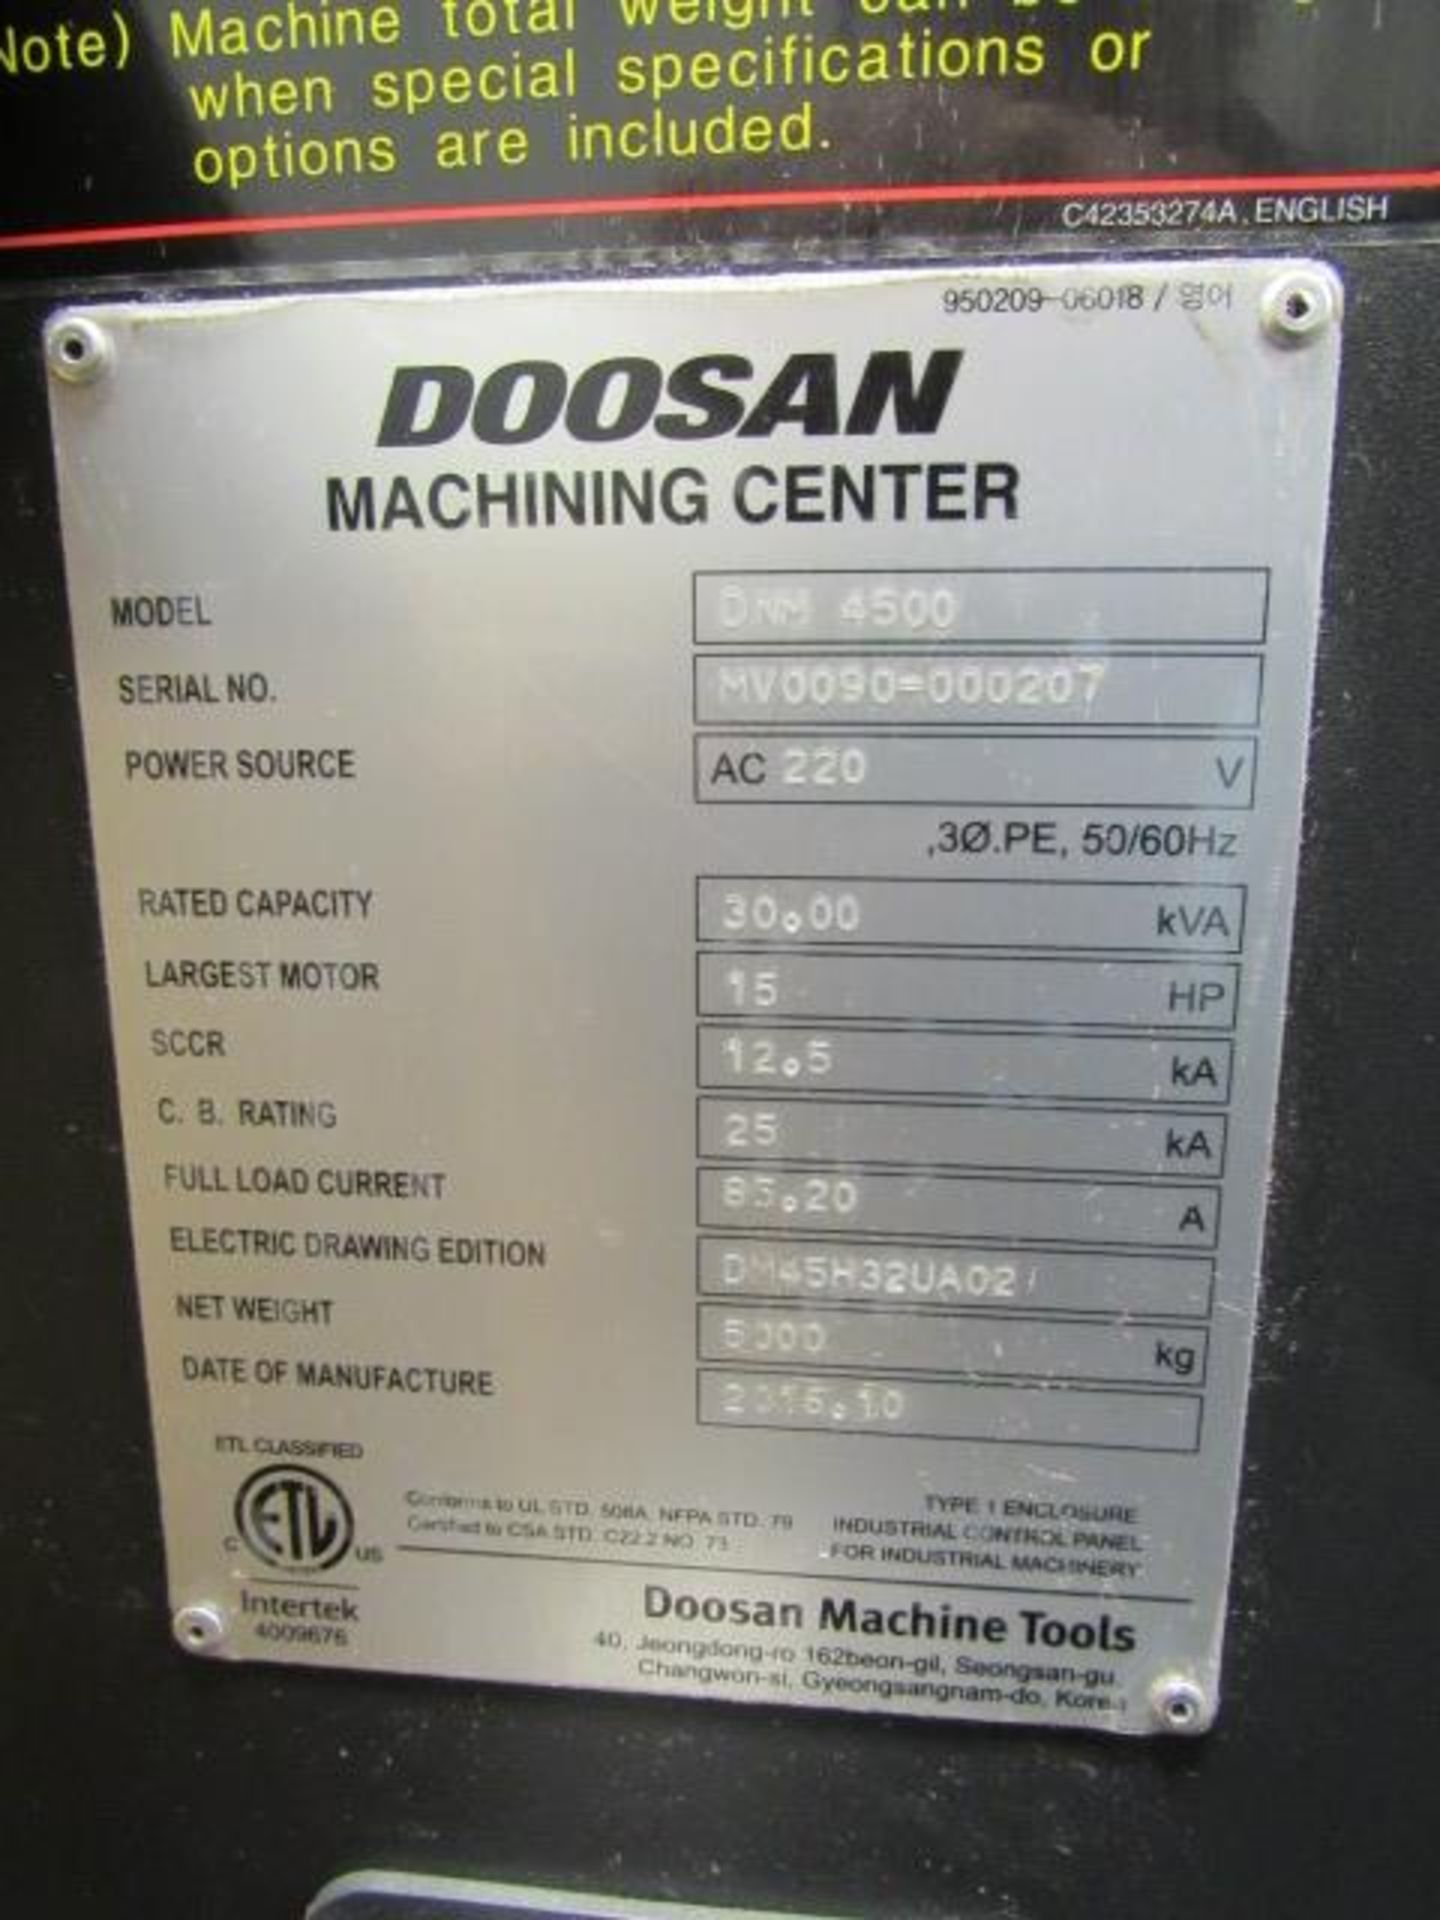 Doosan DNM 4500 CNC Vertical Machining Center with 39.4'' x 17.7'' Tables, Big Plus #40, Spindle - Image 8 of 9